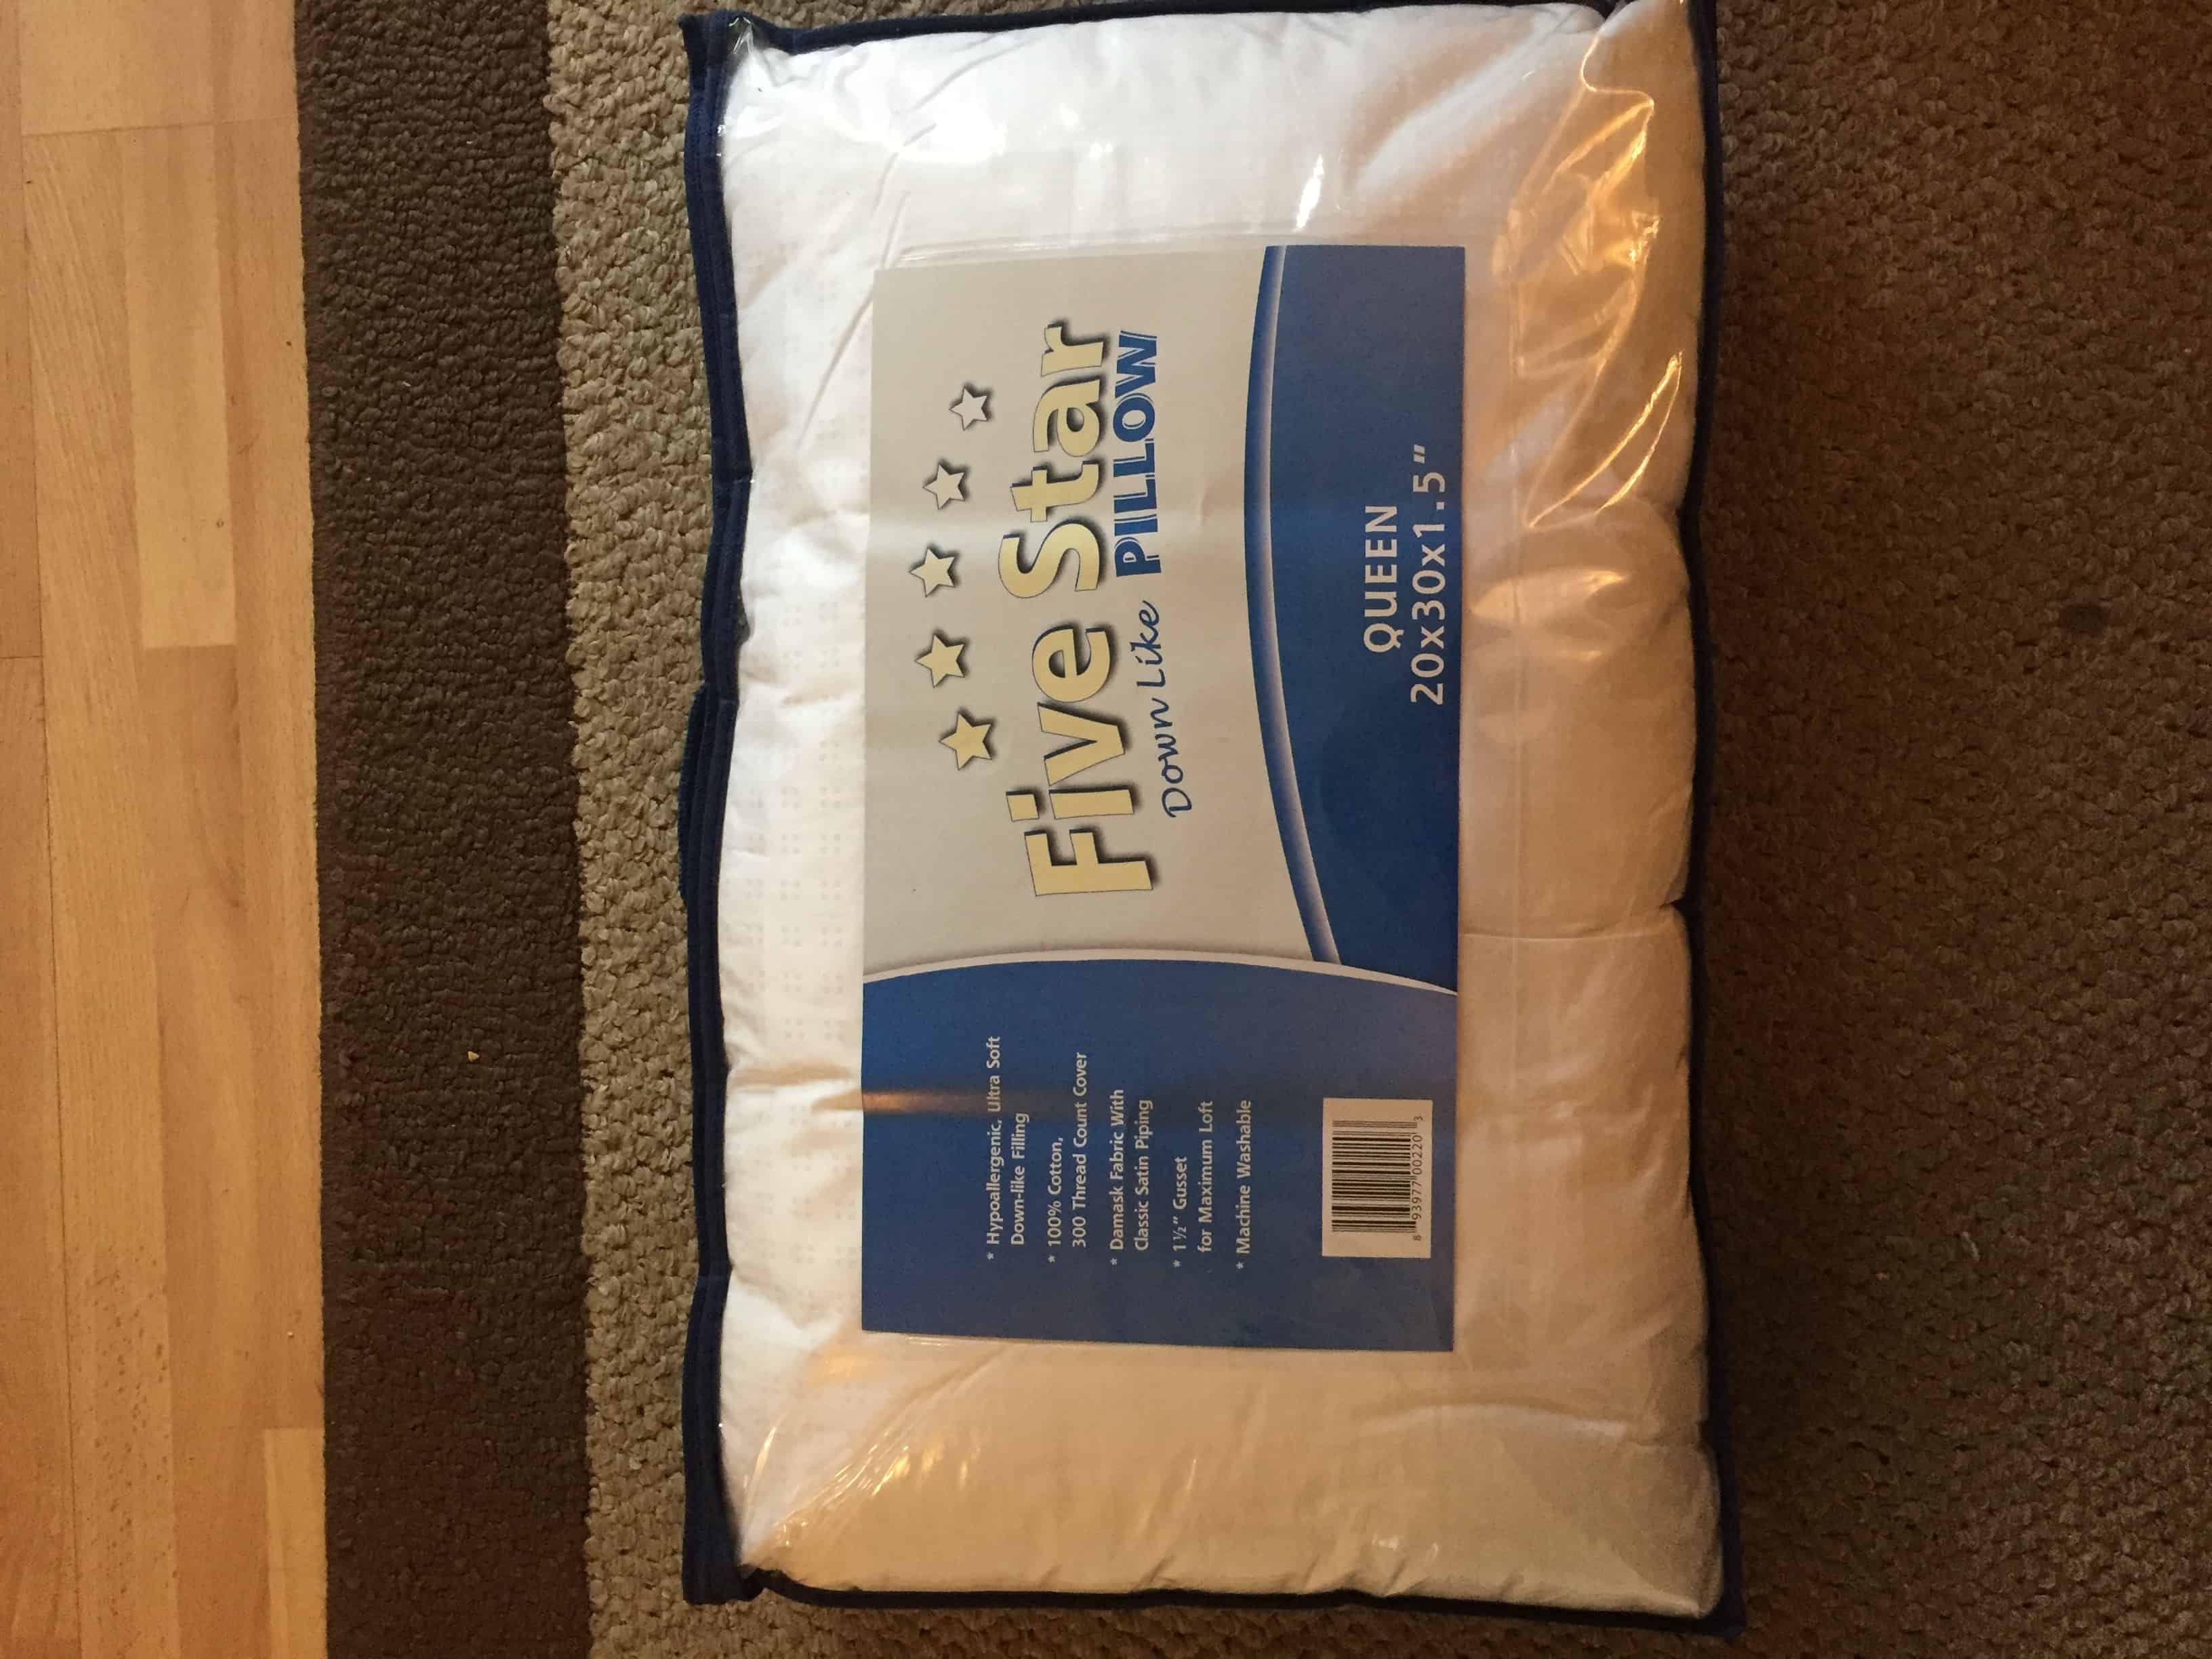 Five Star Down Alternative Pillow Package